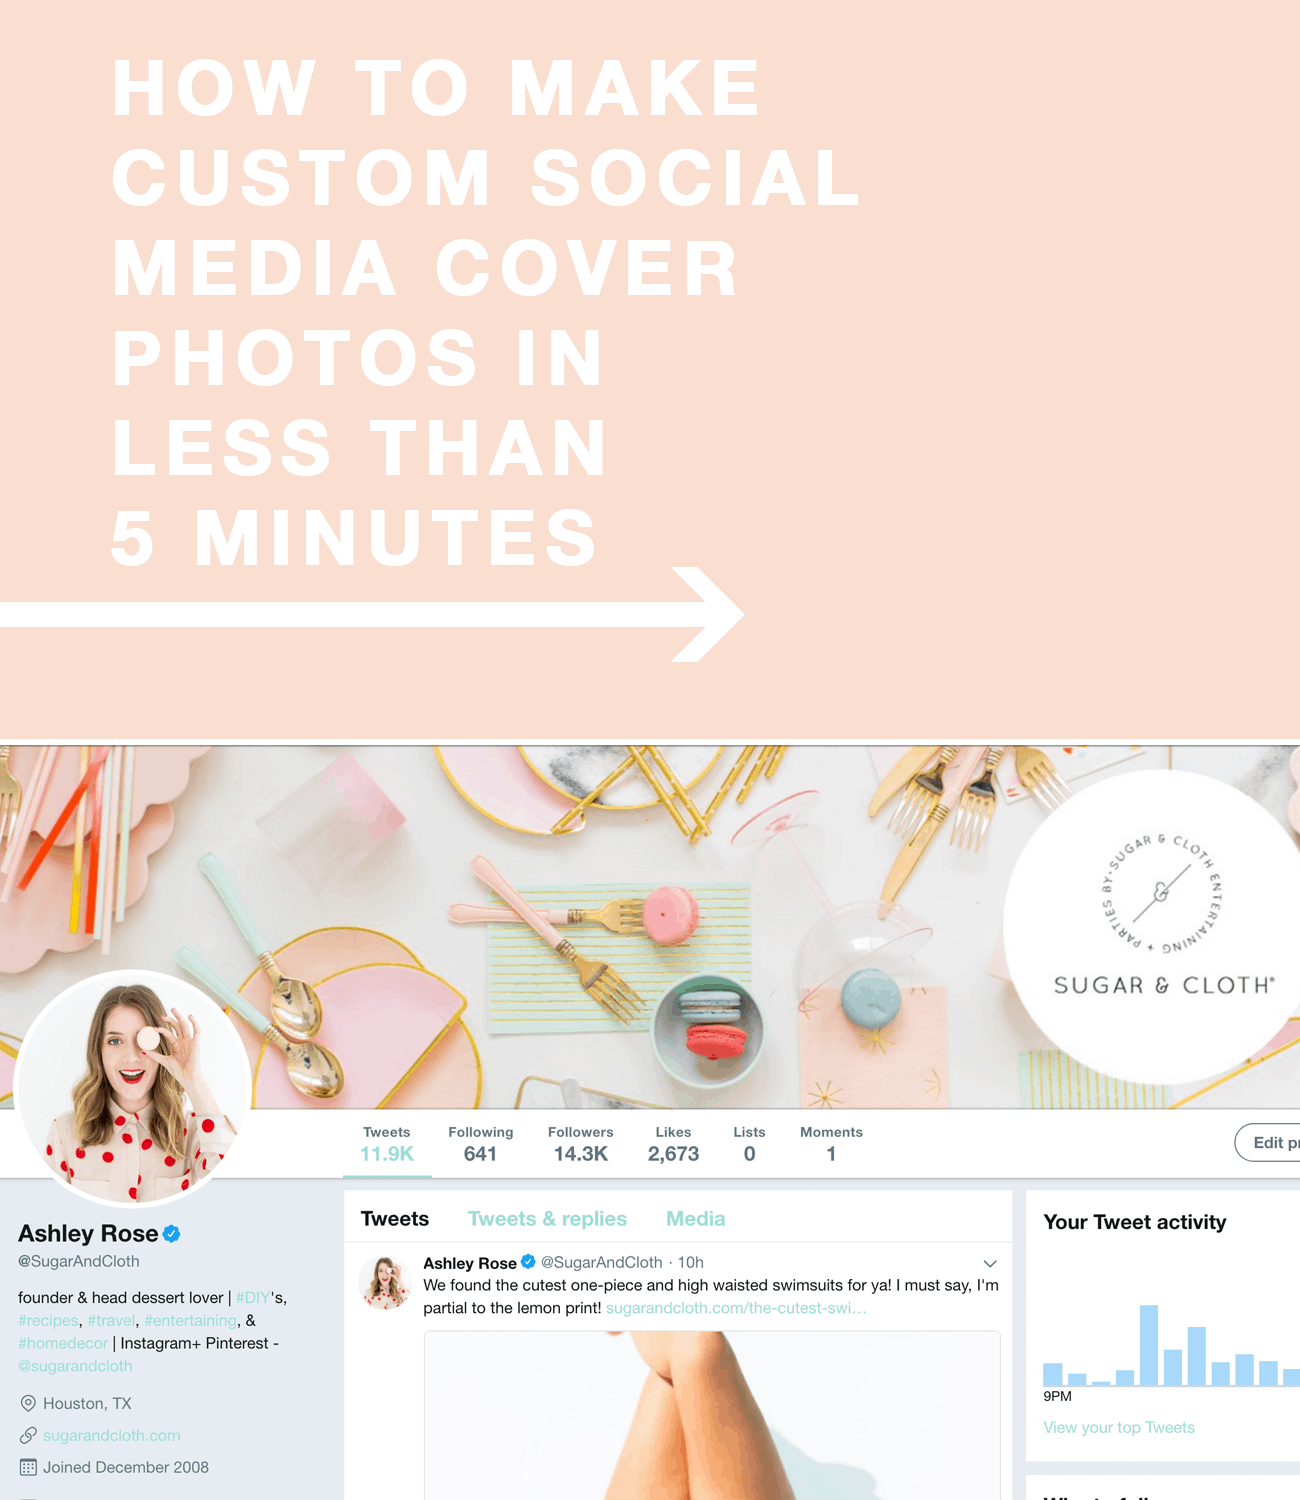 how to make a custom social media cover photos in less than 5 minutes by top Houston lifestyle blogger Ashley Rose of Sugar and Cloth